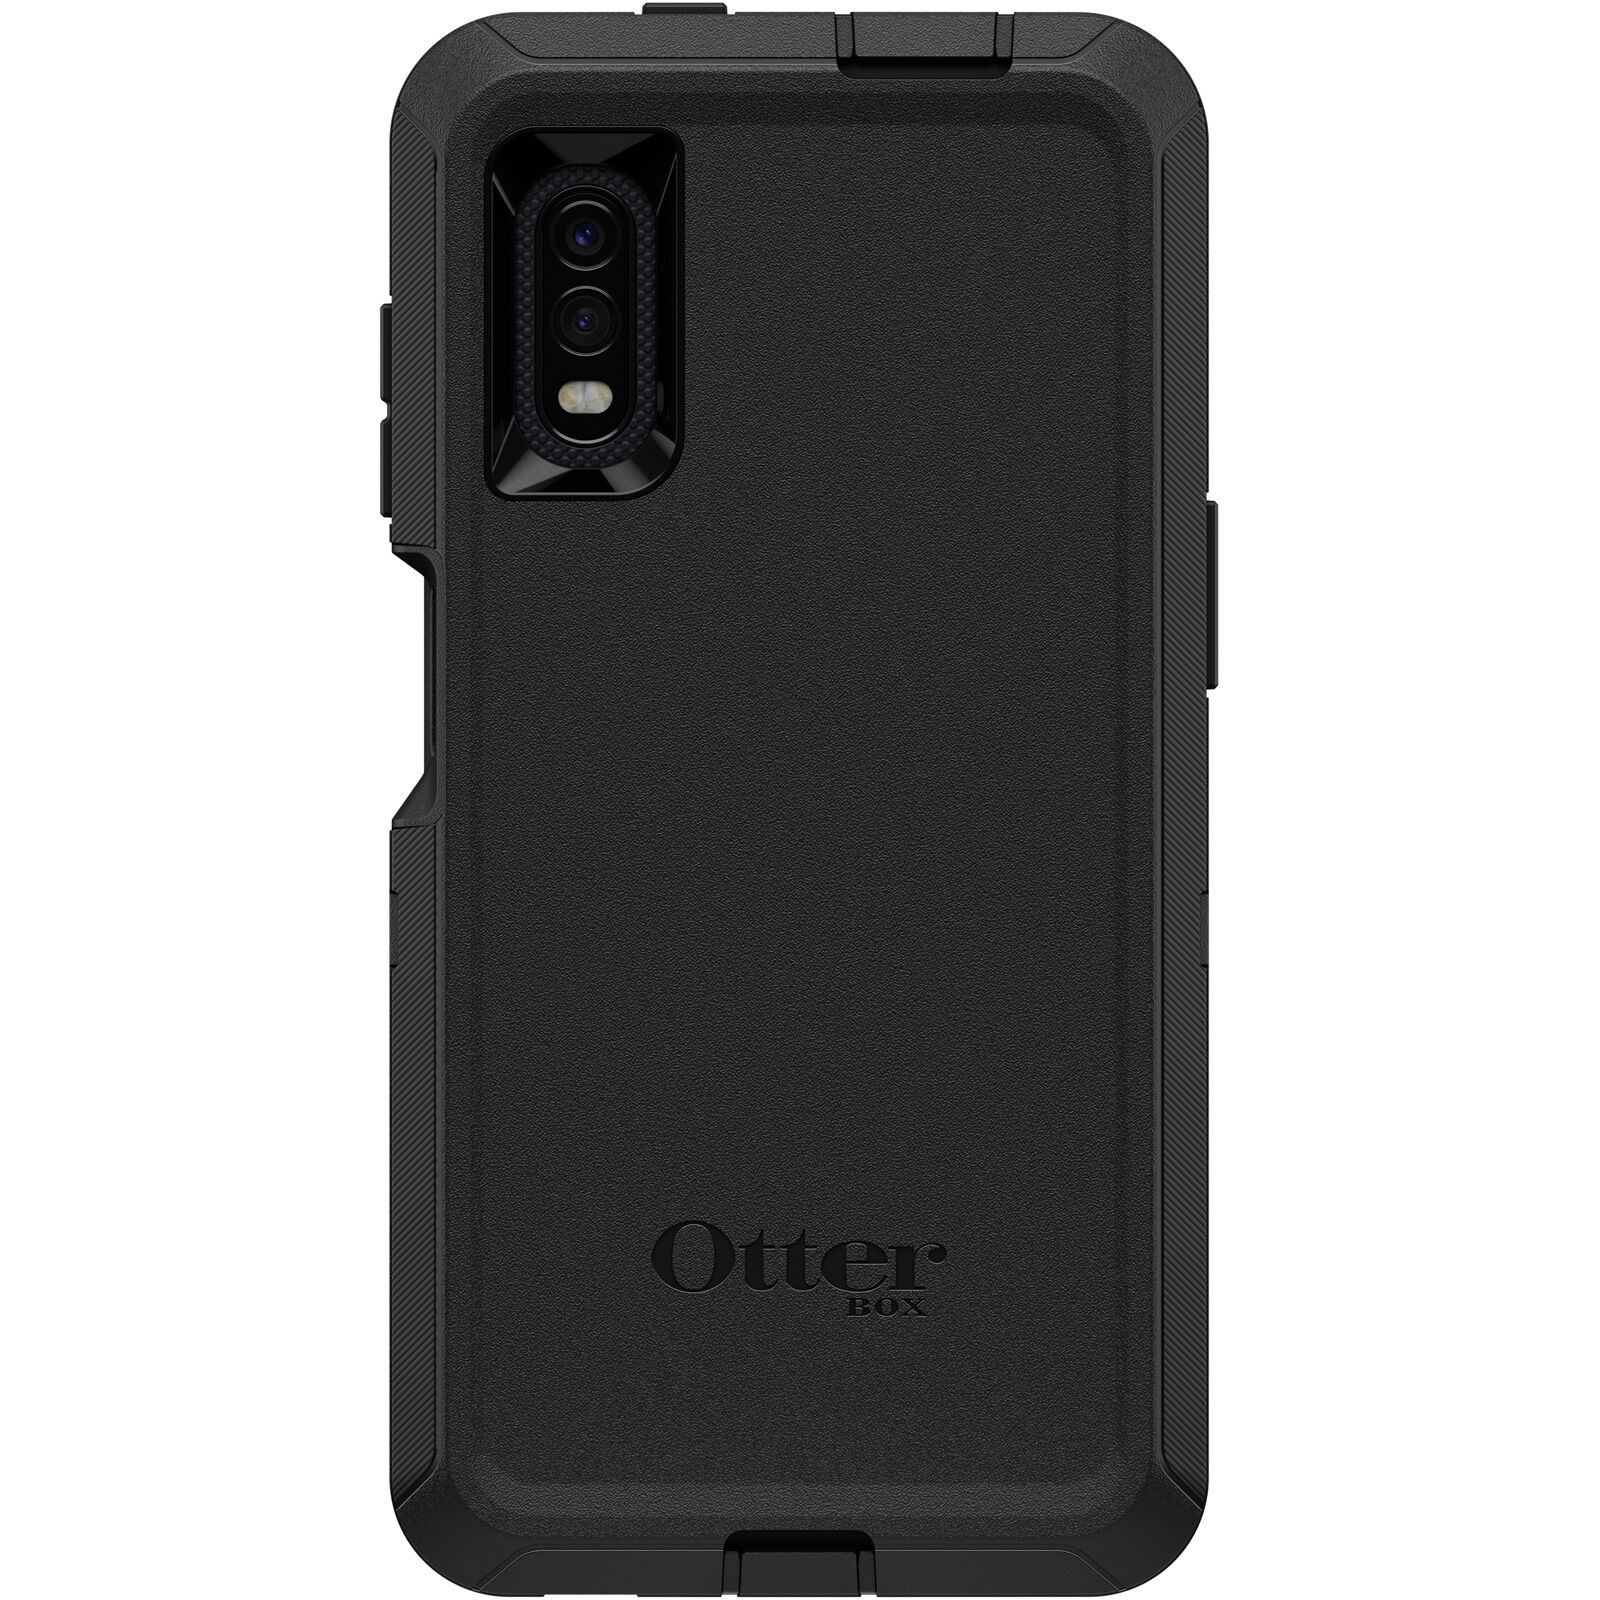 Bulk Single-pack OTTERBOX DEFENDER SERIES SCREENLESS EDITION Case for Galaxy XCover Pro - BLACK 1 unit 